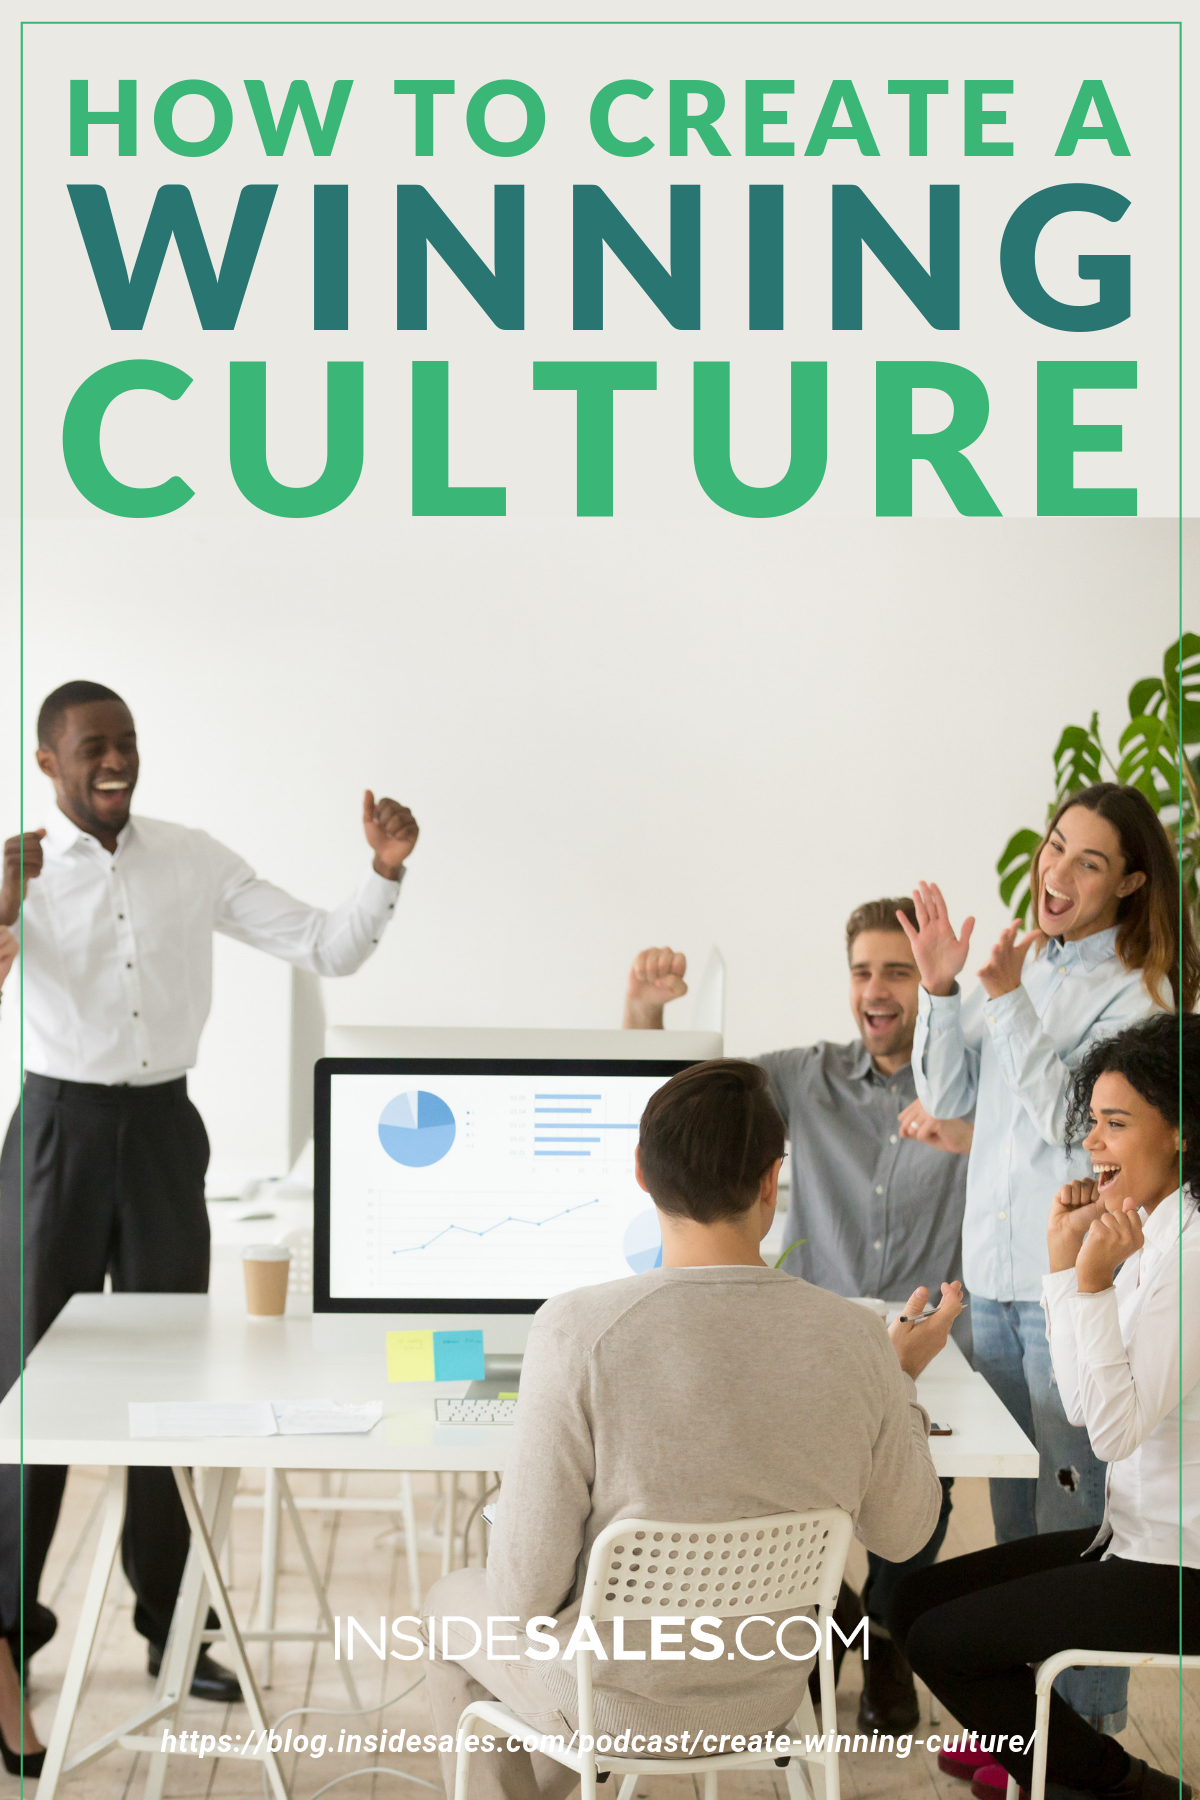 How To Create A Winning Culture https://resources.insidesales.com/blog/podcast/create-winning-culture/